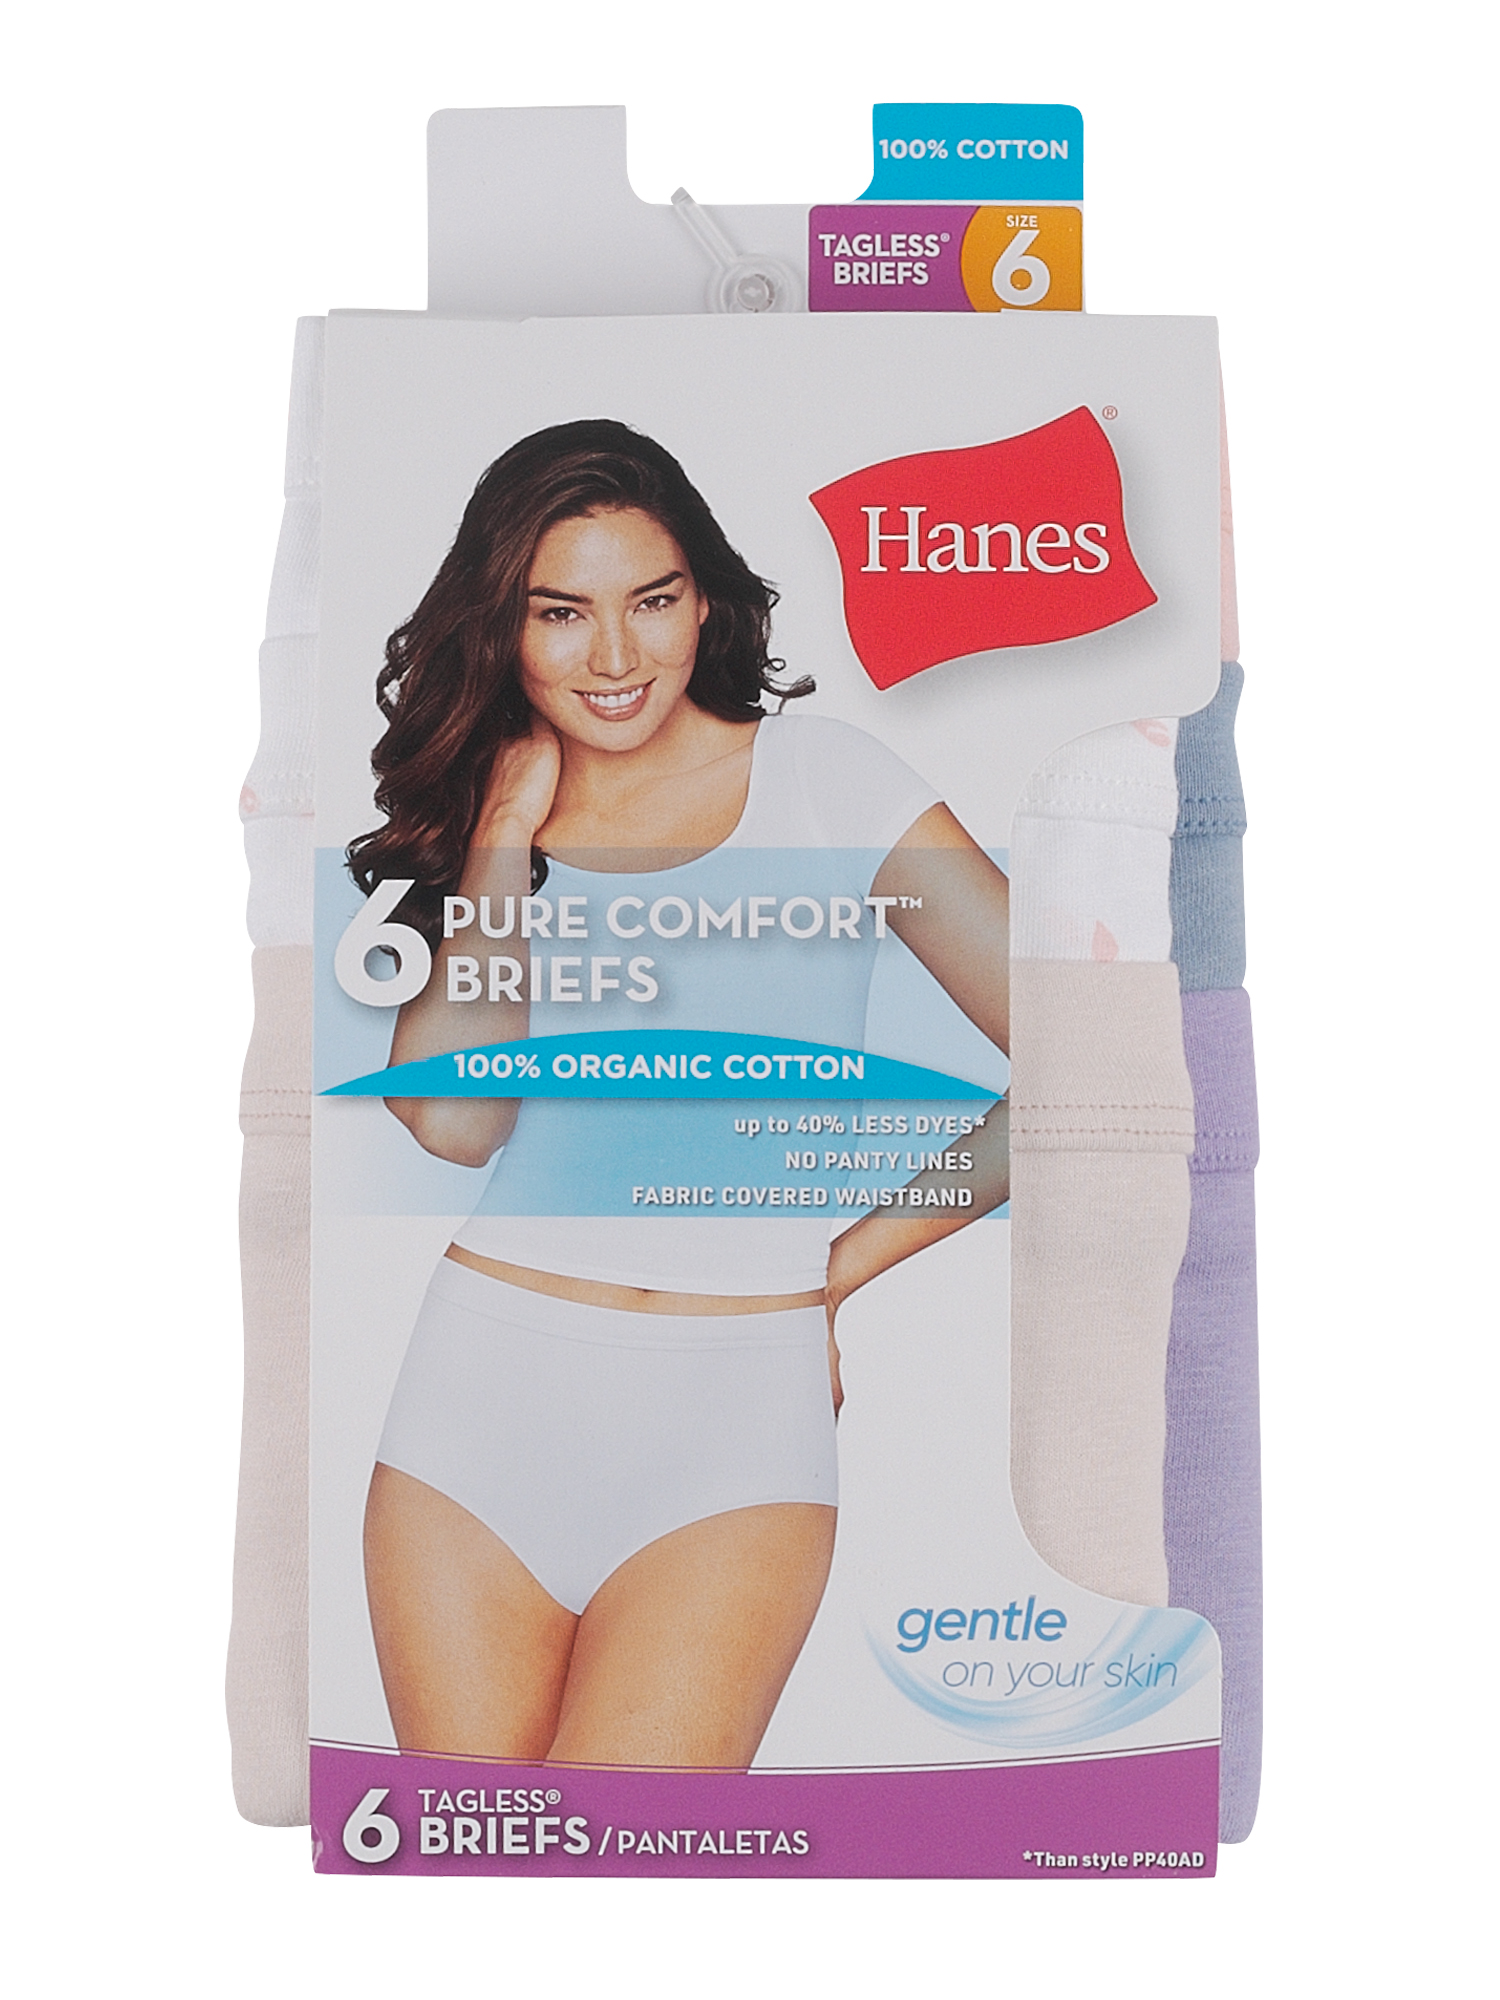 Hanes Pure Comfort Women’s Briefs Underwear, 100% Organic Cotton, Assorted Colors, 6-Pack - image 2 of 8